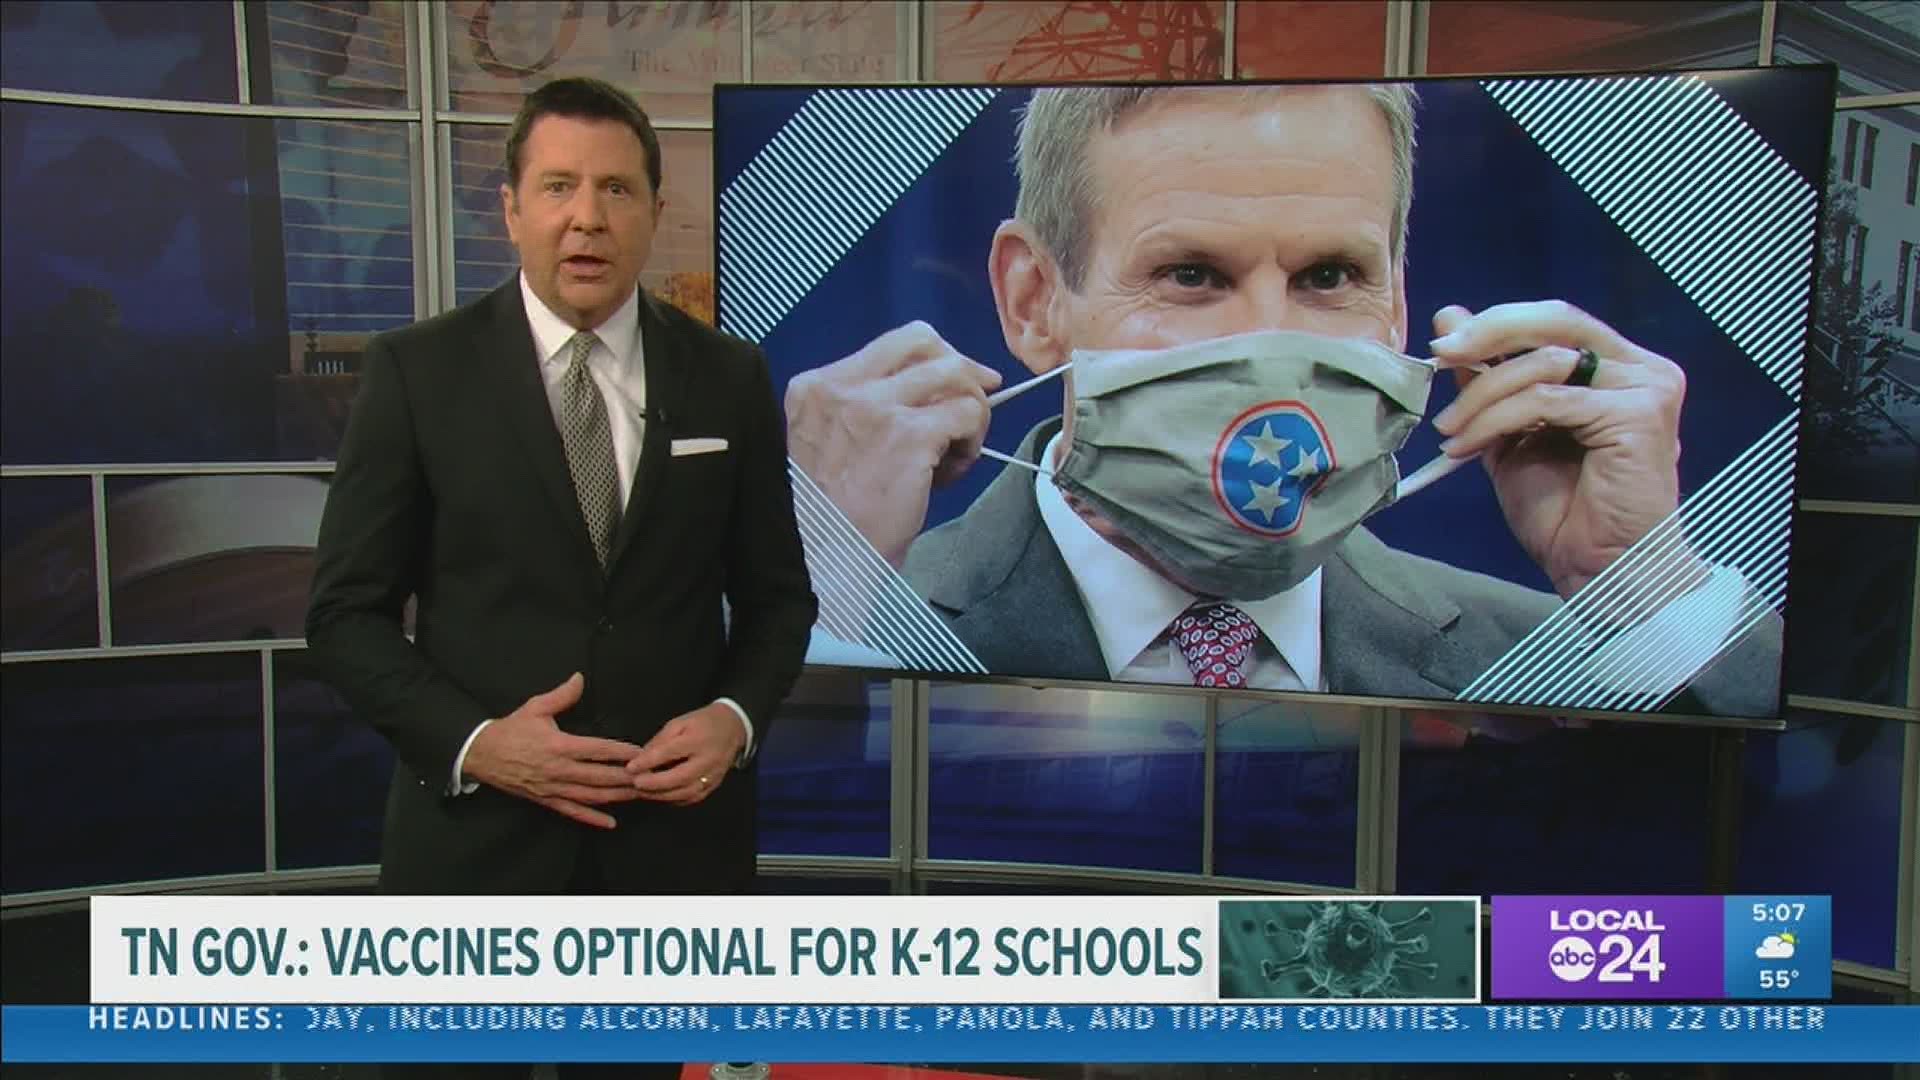 Gov. Bill Lee said he doesn't foresee COVID-19 mandates for school districts in Tennessee, saying vaccines are a choice.